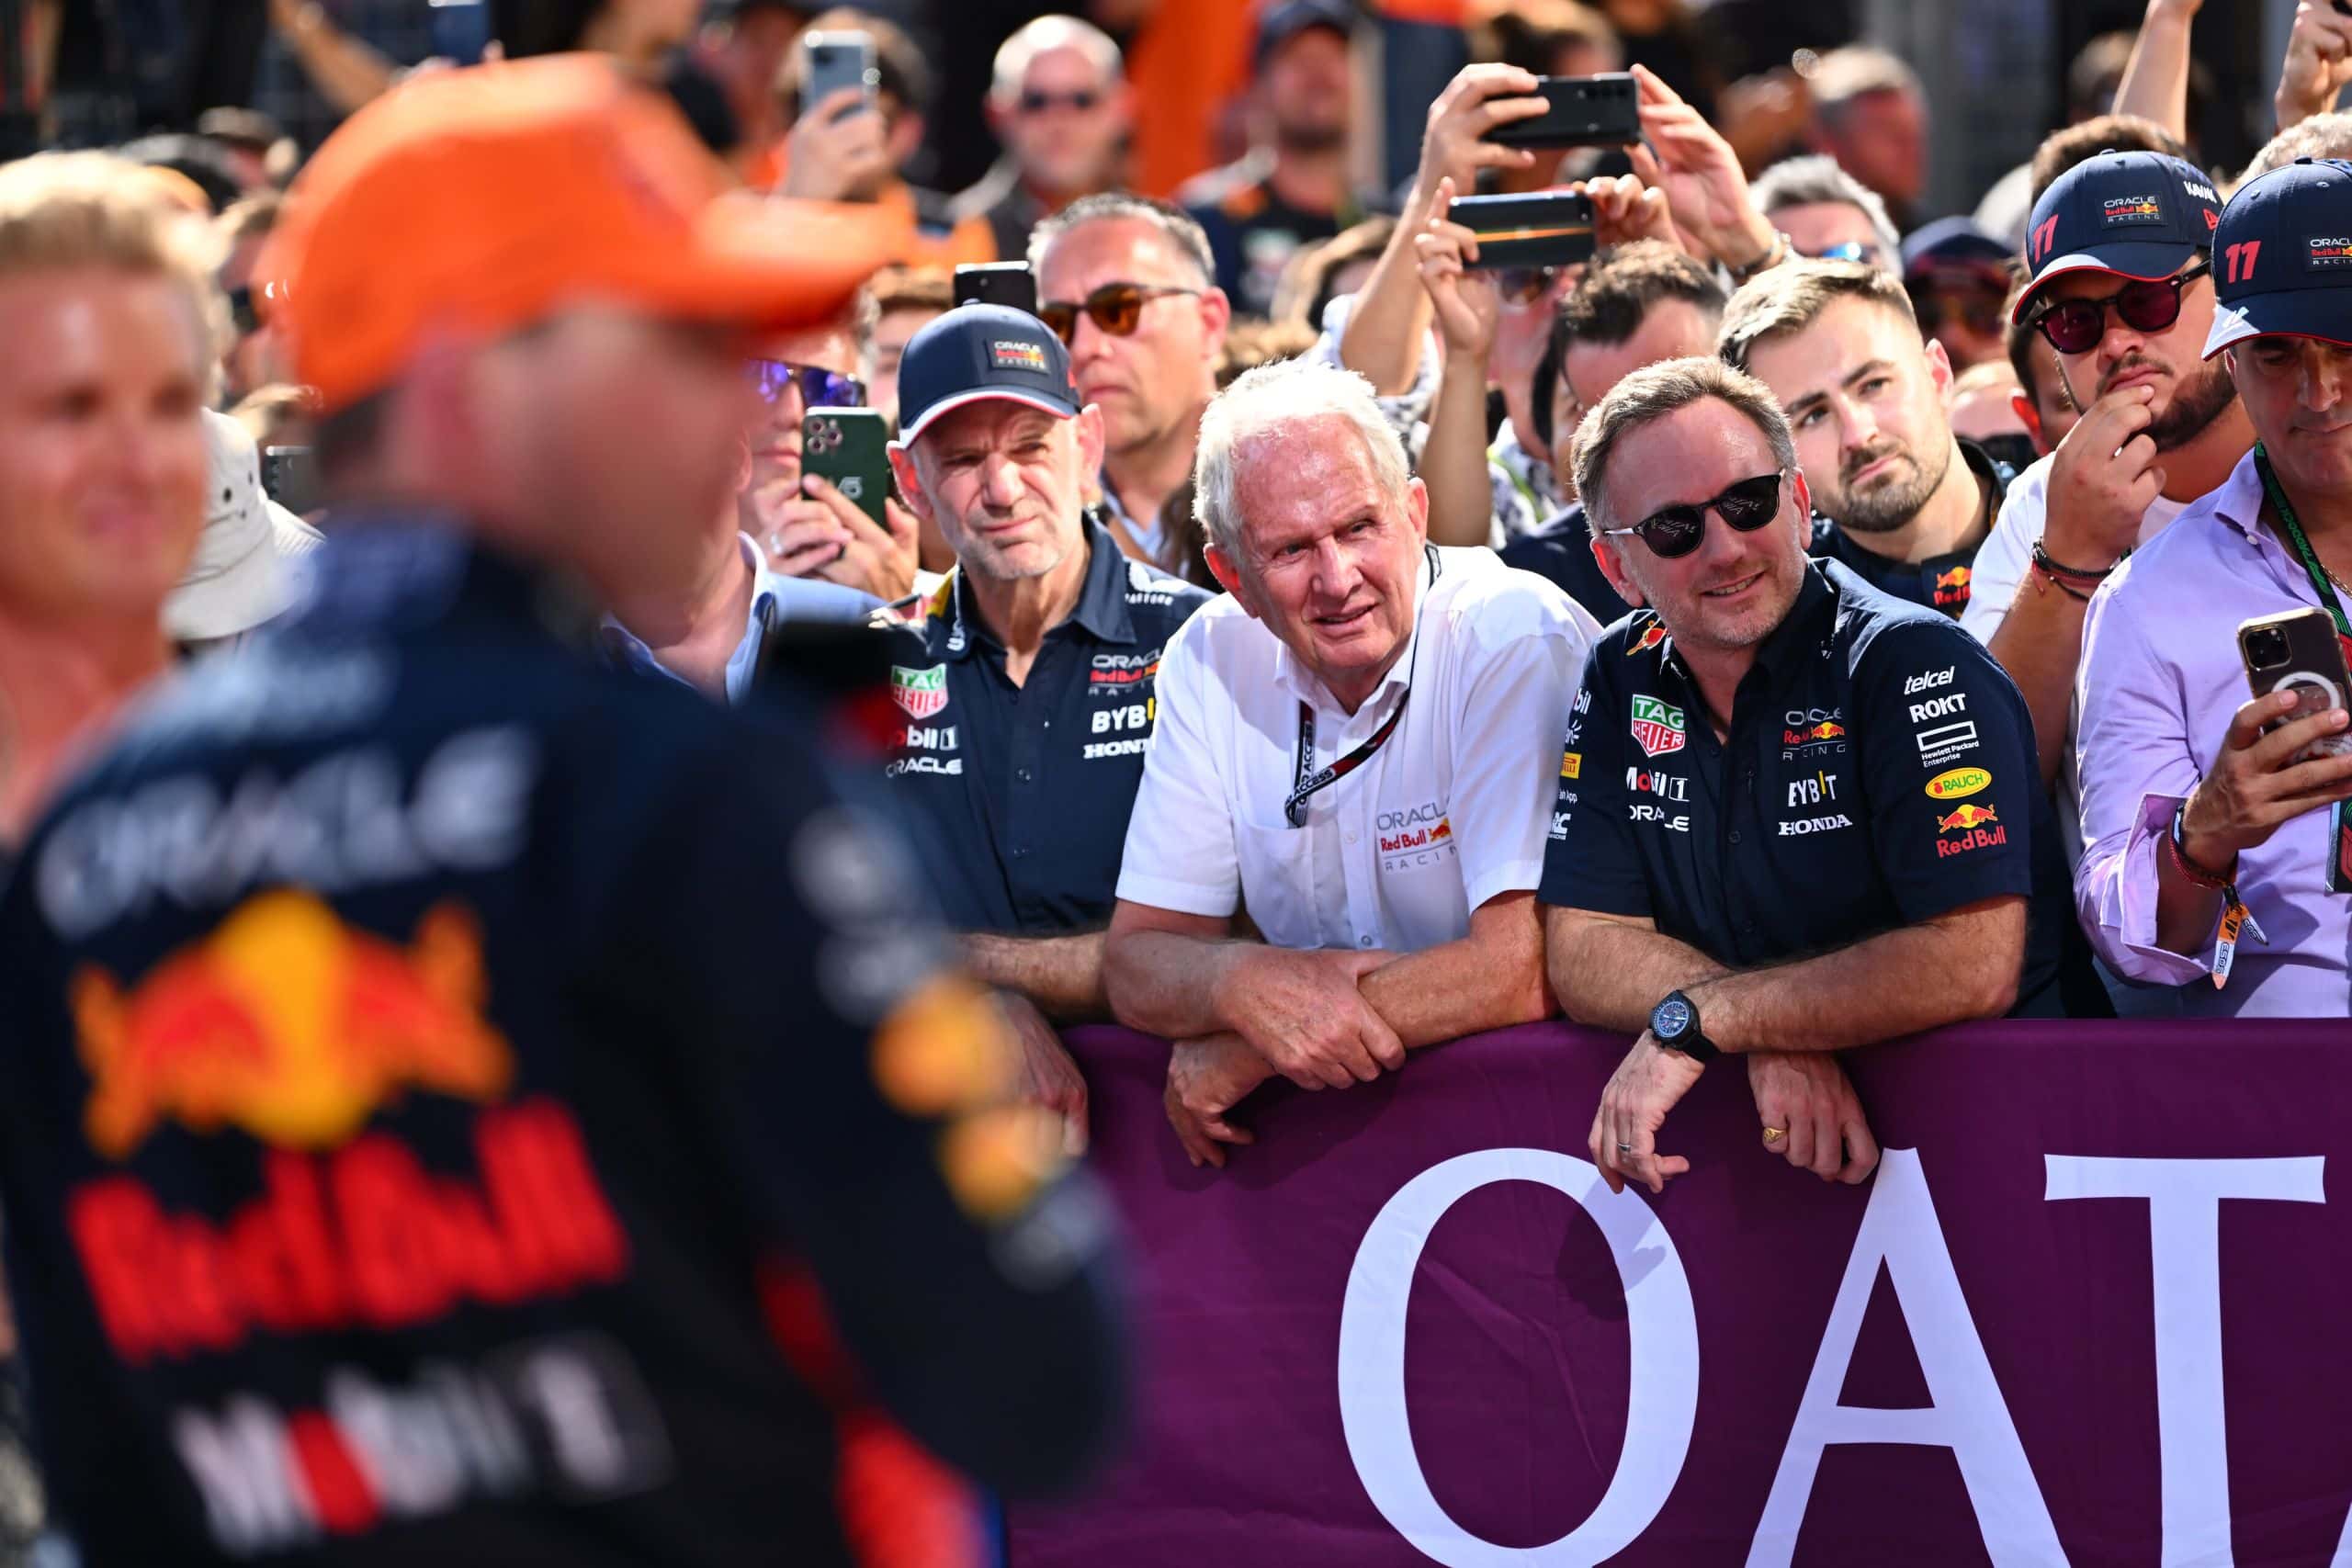 Marko And Verstappen The First Red Bull Dominoes To Spark Mass Exodus?